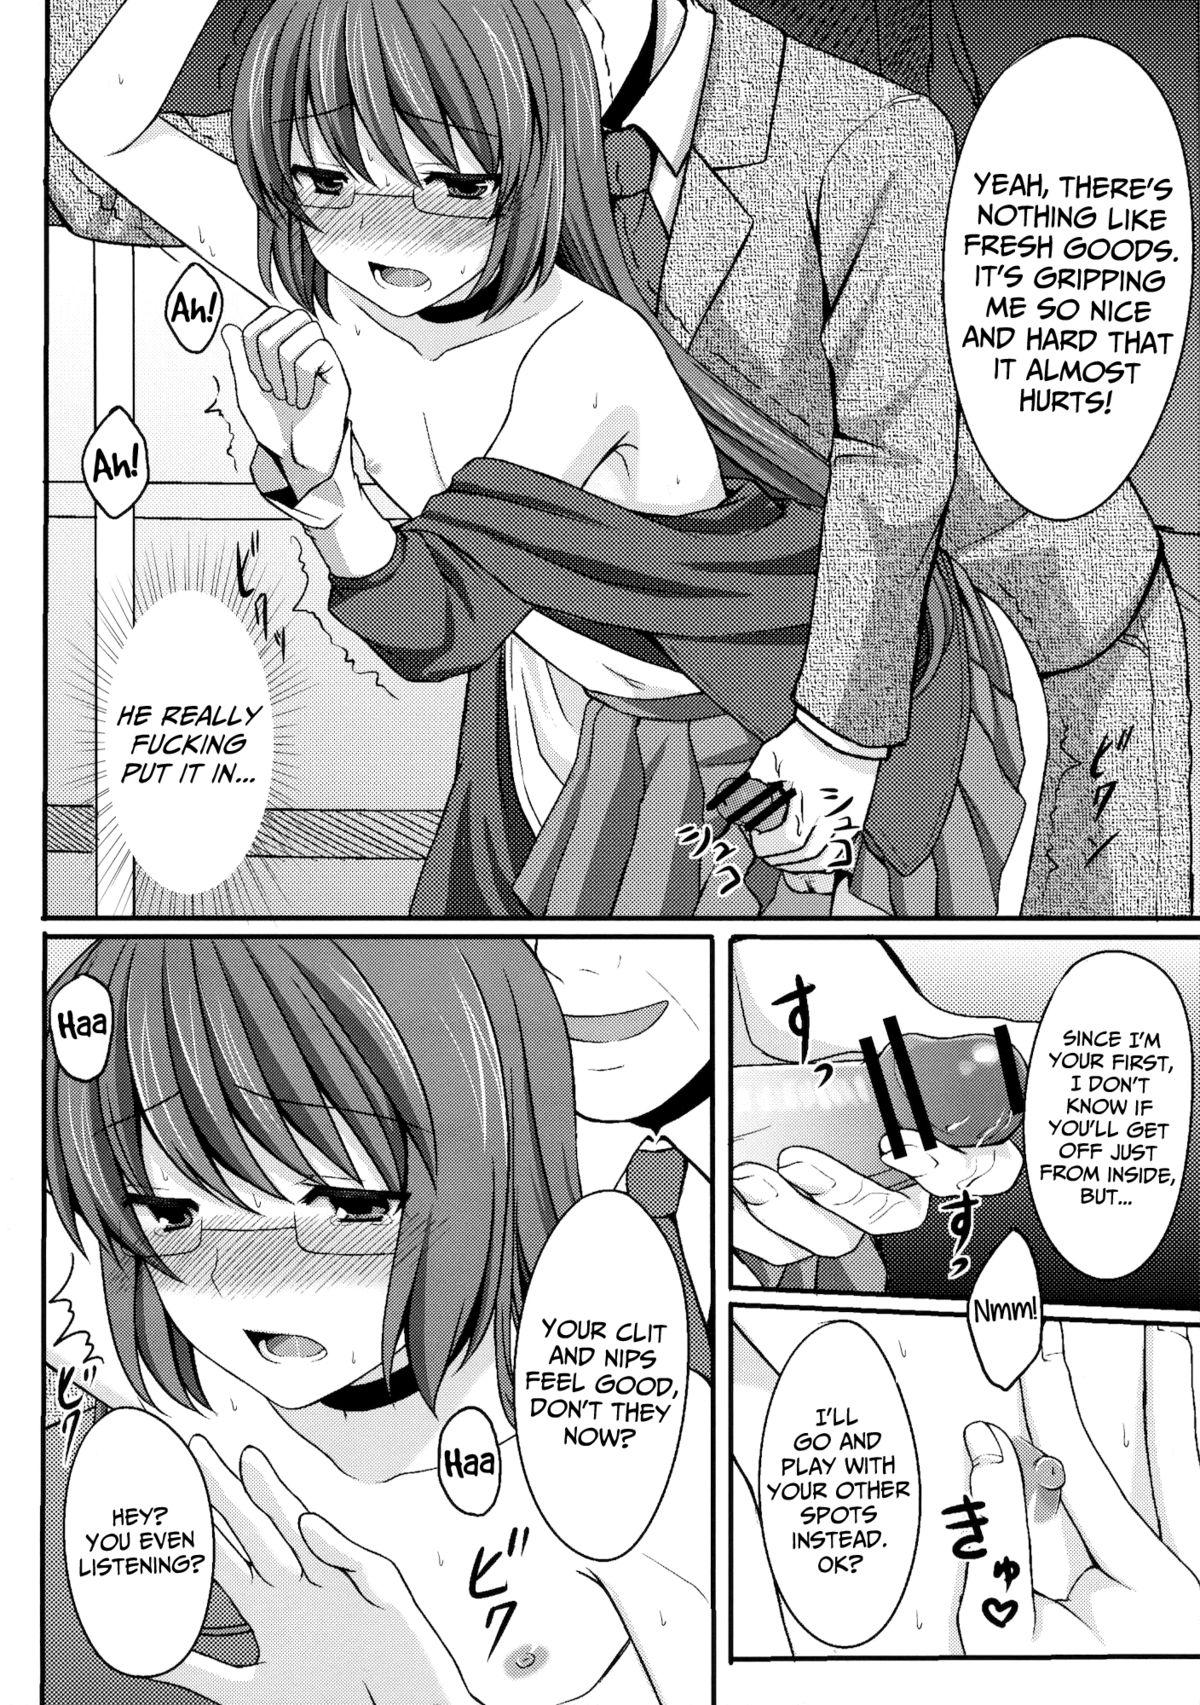 Stud Kami-sama o Chikan | God & Molester - The world god only knows Cuck - Page 11